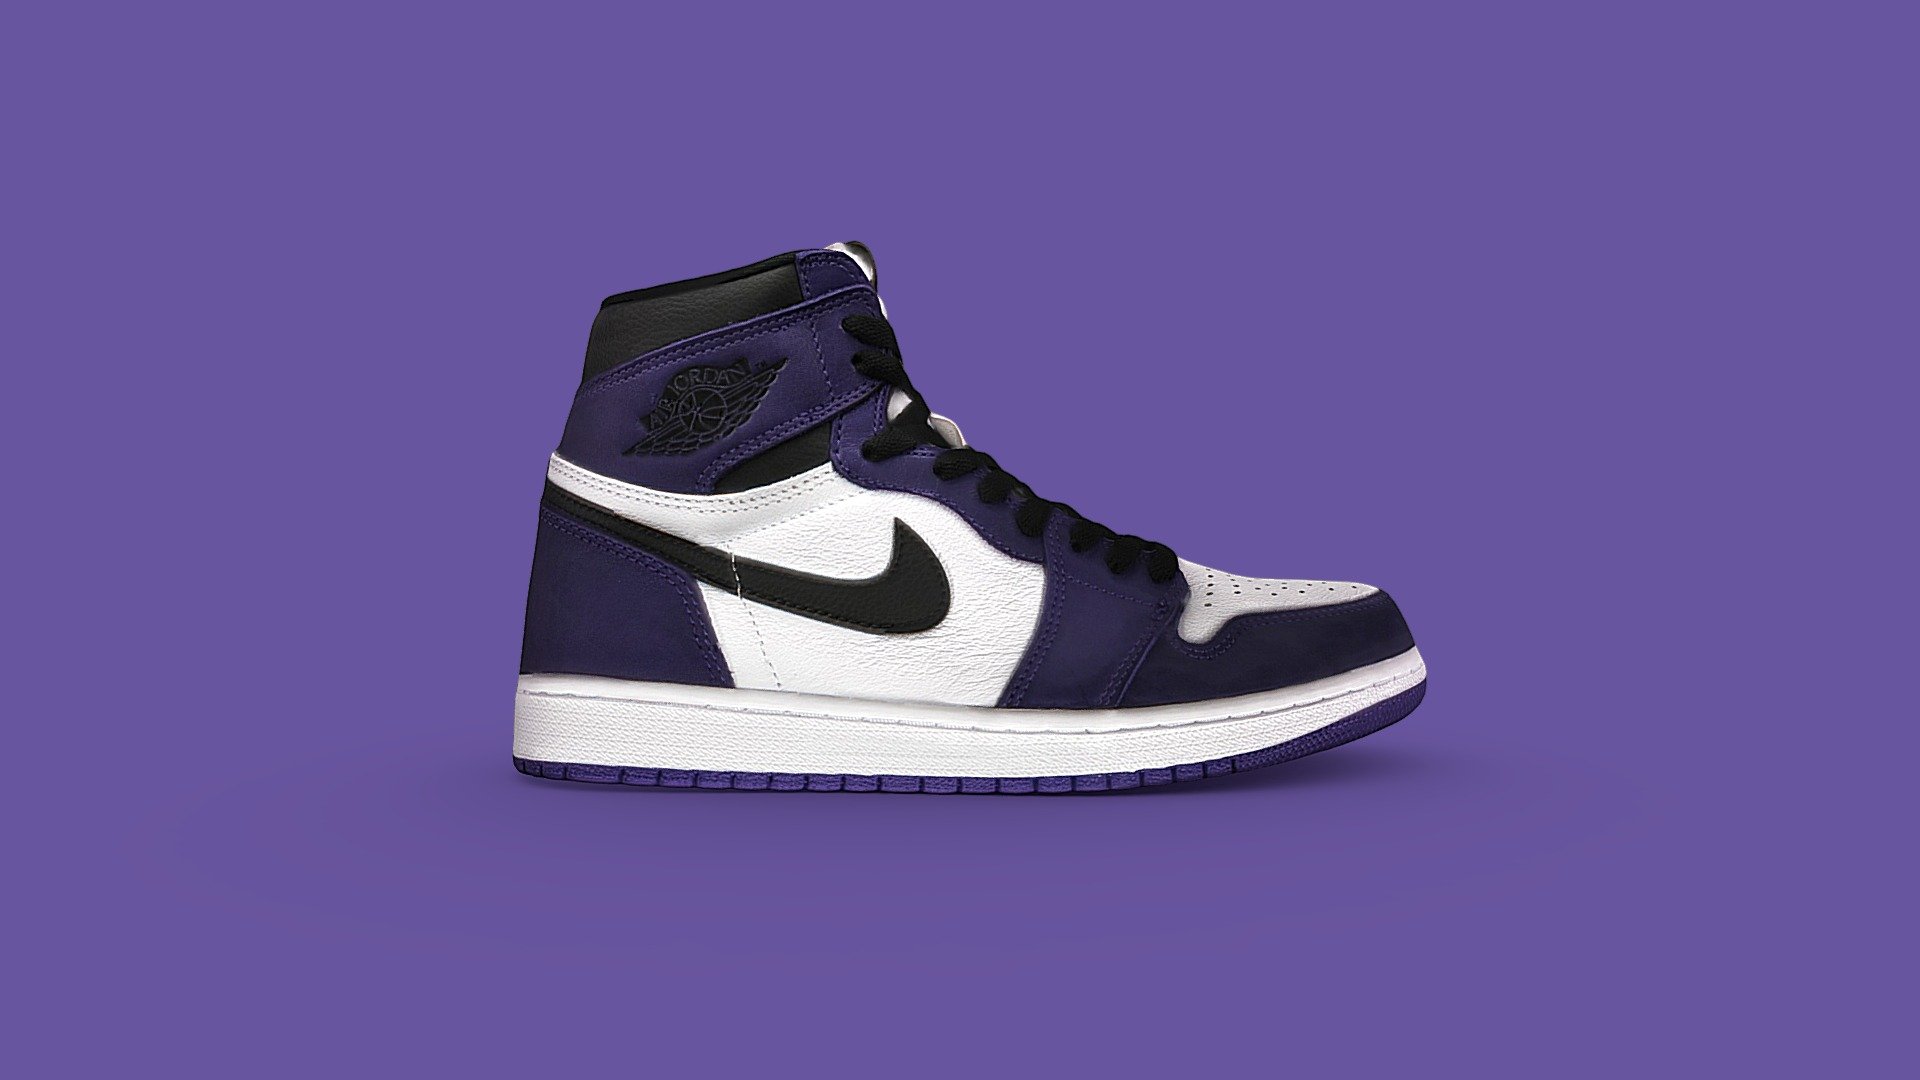 This Jordan 1 consists of a white leather upper with Court Purple overlays and black detailing. A black Swoosh and Wings logo, white midsole, and Court Purple outsole completes the design. These sneakers released in April of 2020 and retailed for $170.

This 3D model was created using Switch 3D's innovative scanning technology.

➖

Switch 3D 

Want professional 3D scans of your products? Let's talk! 👉 switch3d.co - Air Jordan 1 Retro High OG Court Purple Sneaker - Buy Royalty Free 3D model by Switch 3D (@switch3d) 3d model